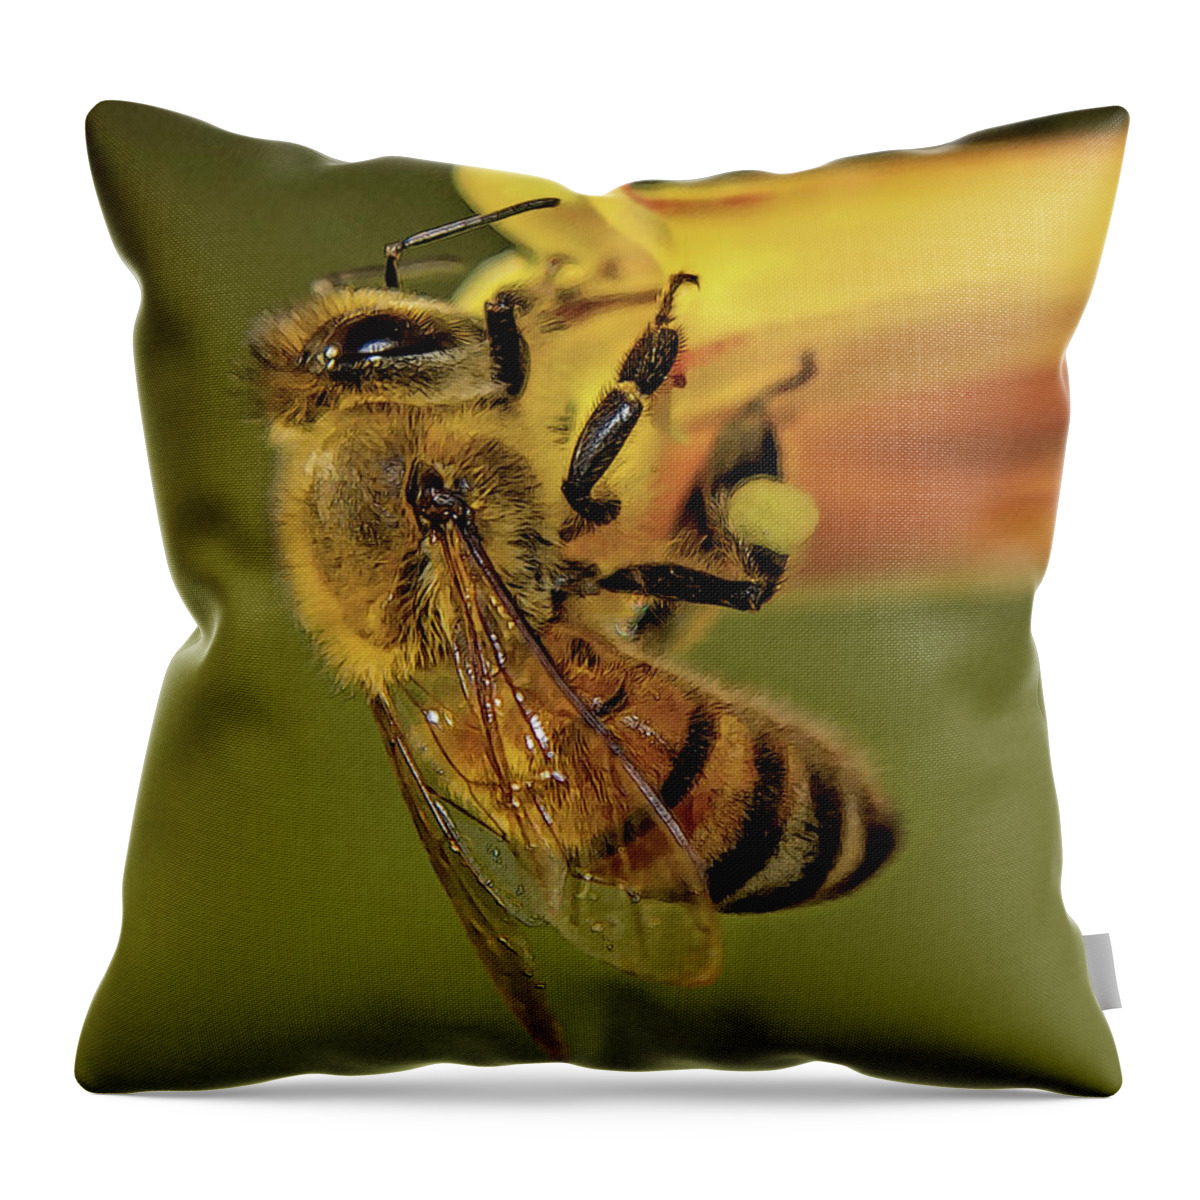 Bee Throw Pillow featuring the photograph European Honey Bee by Larry Linton